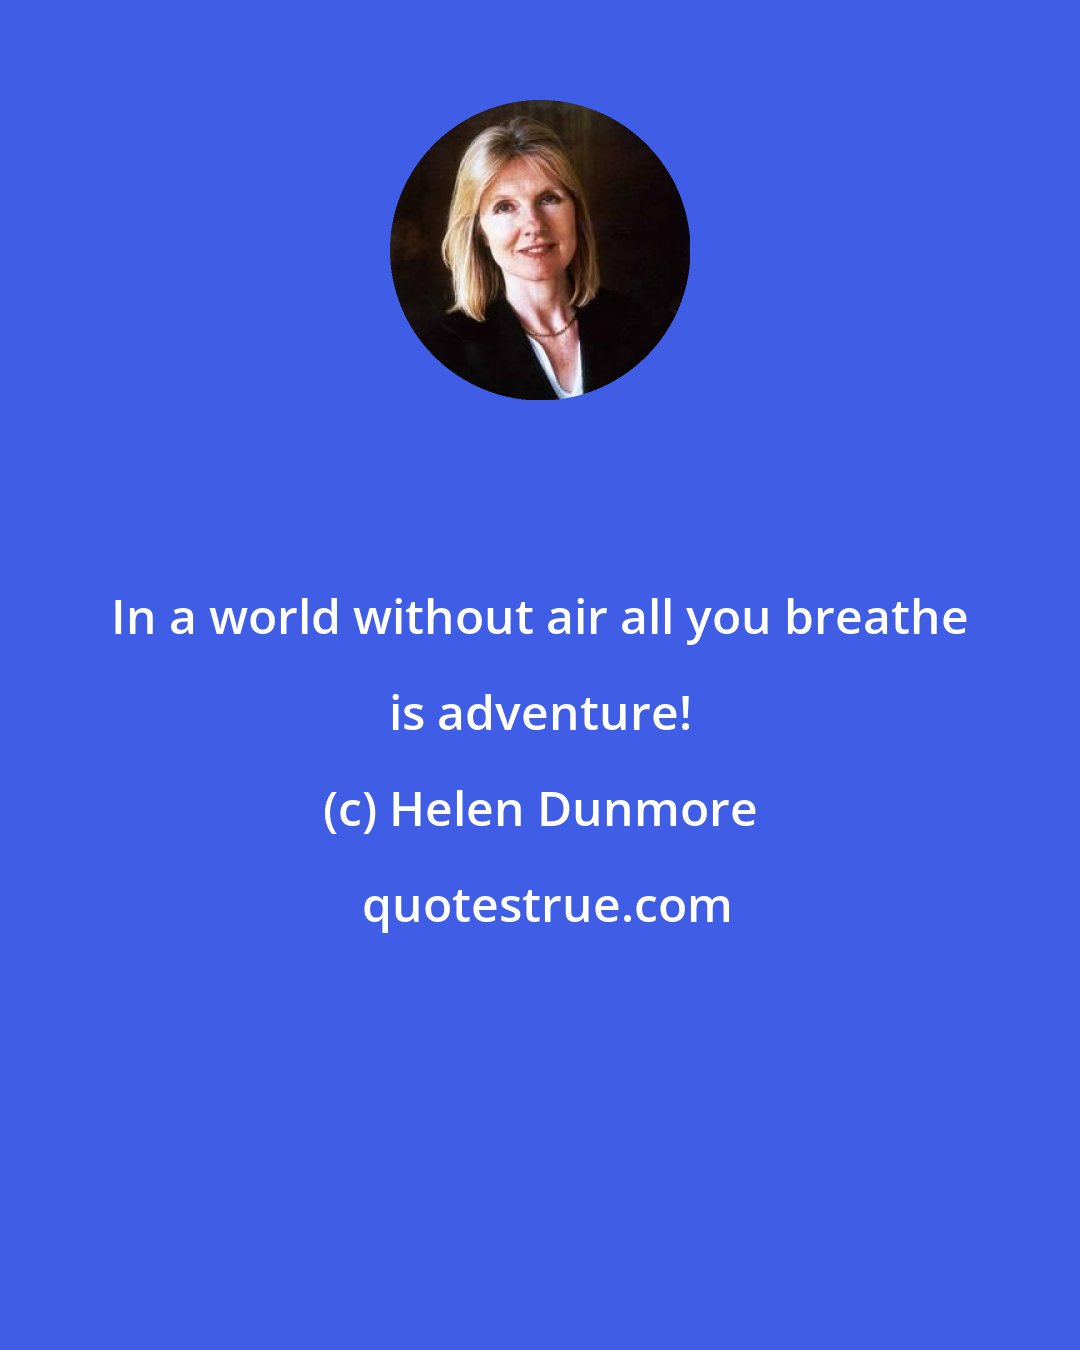 Helen Dunmore: In a world without air all you breathe is adventure!